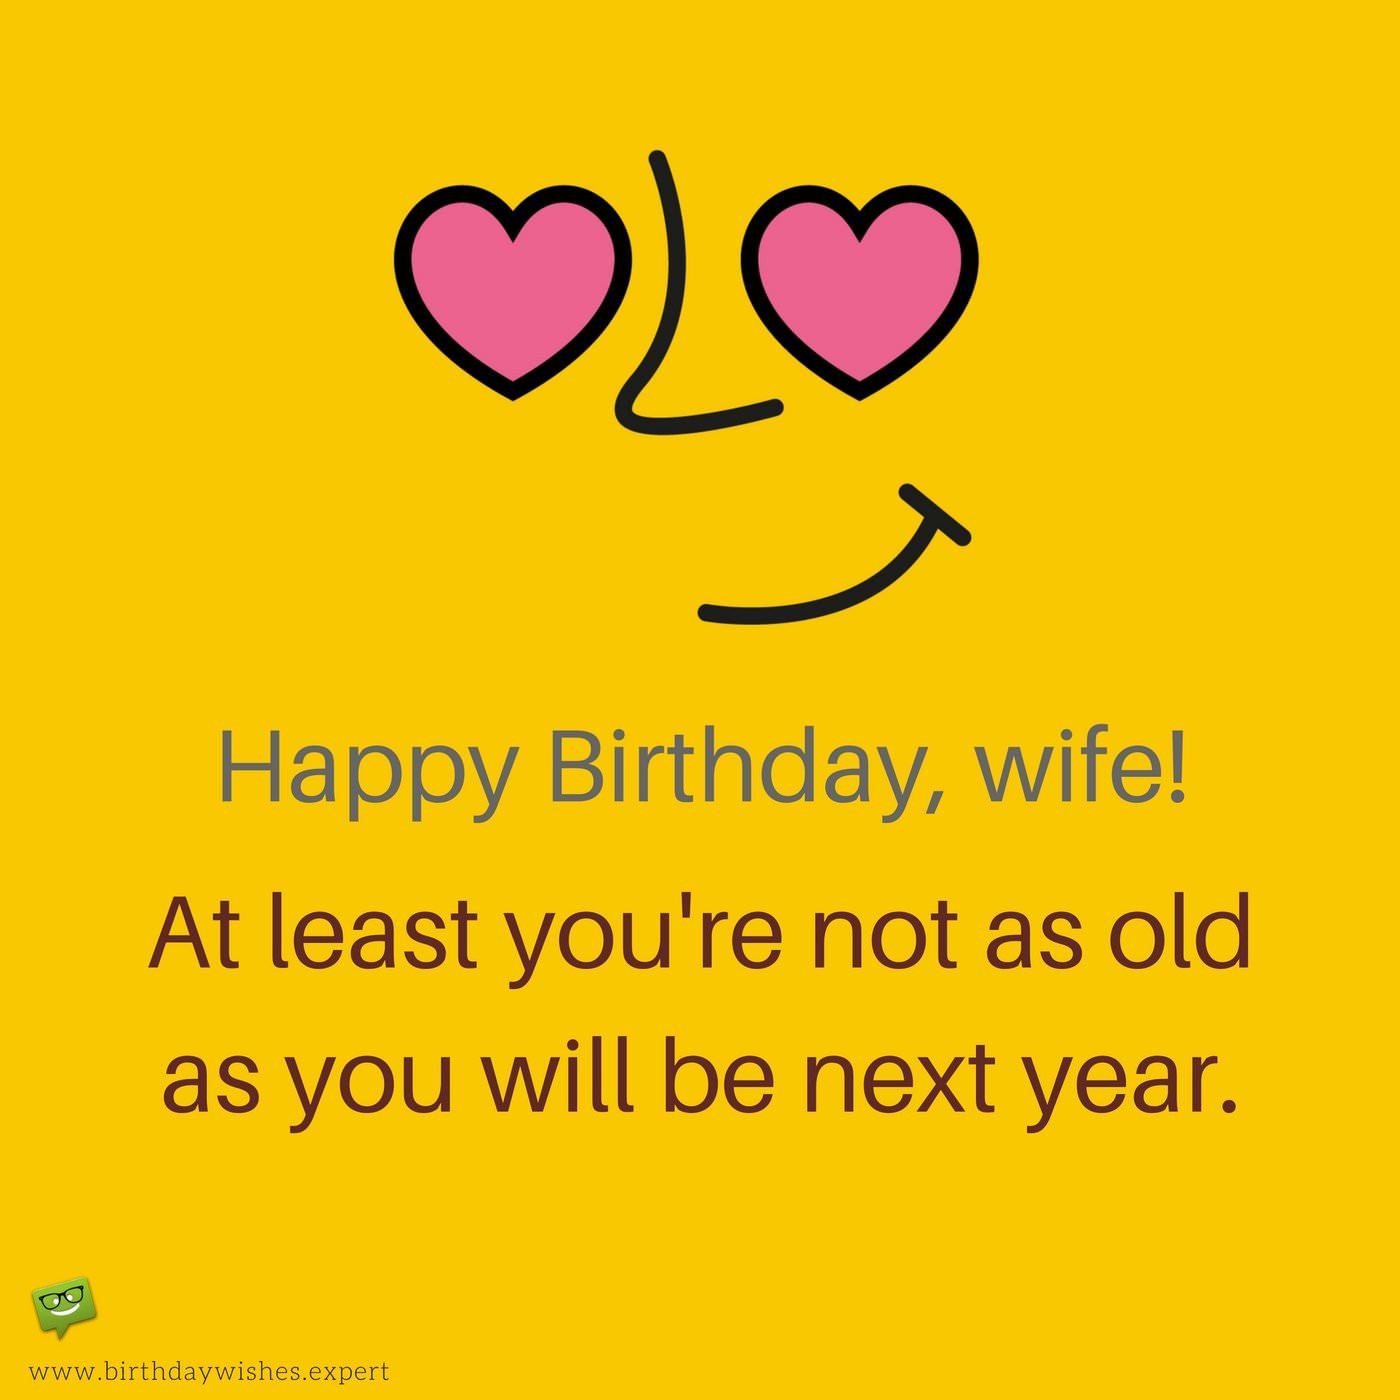 Funny Birthday Wishes For Wife
 The Funniest Wishes to Make your Wife Smile on her Birthday